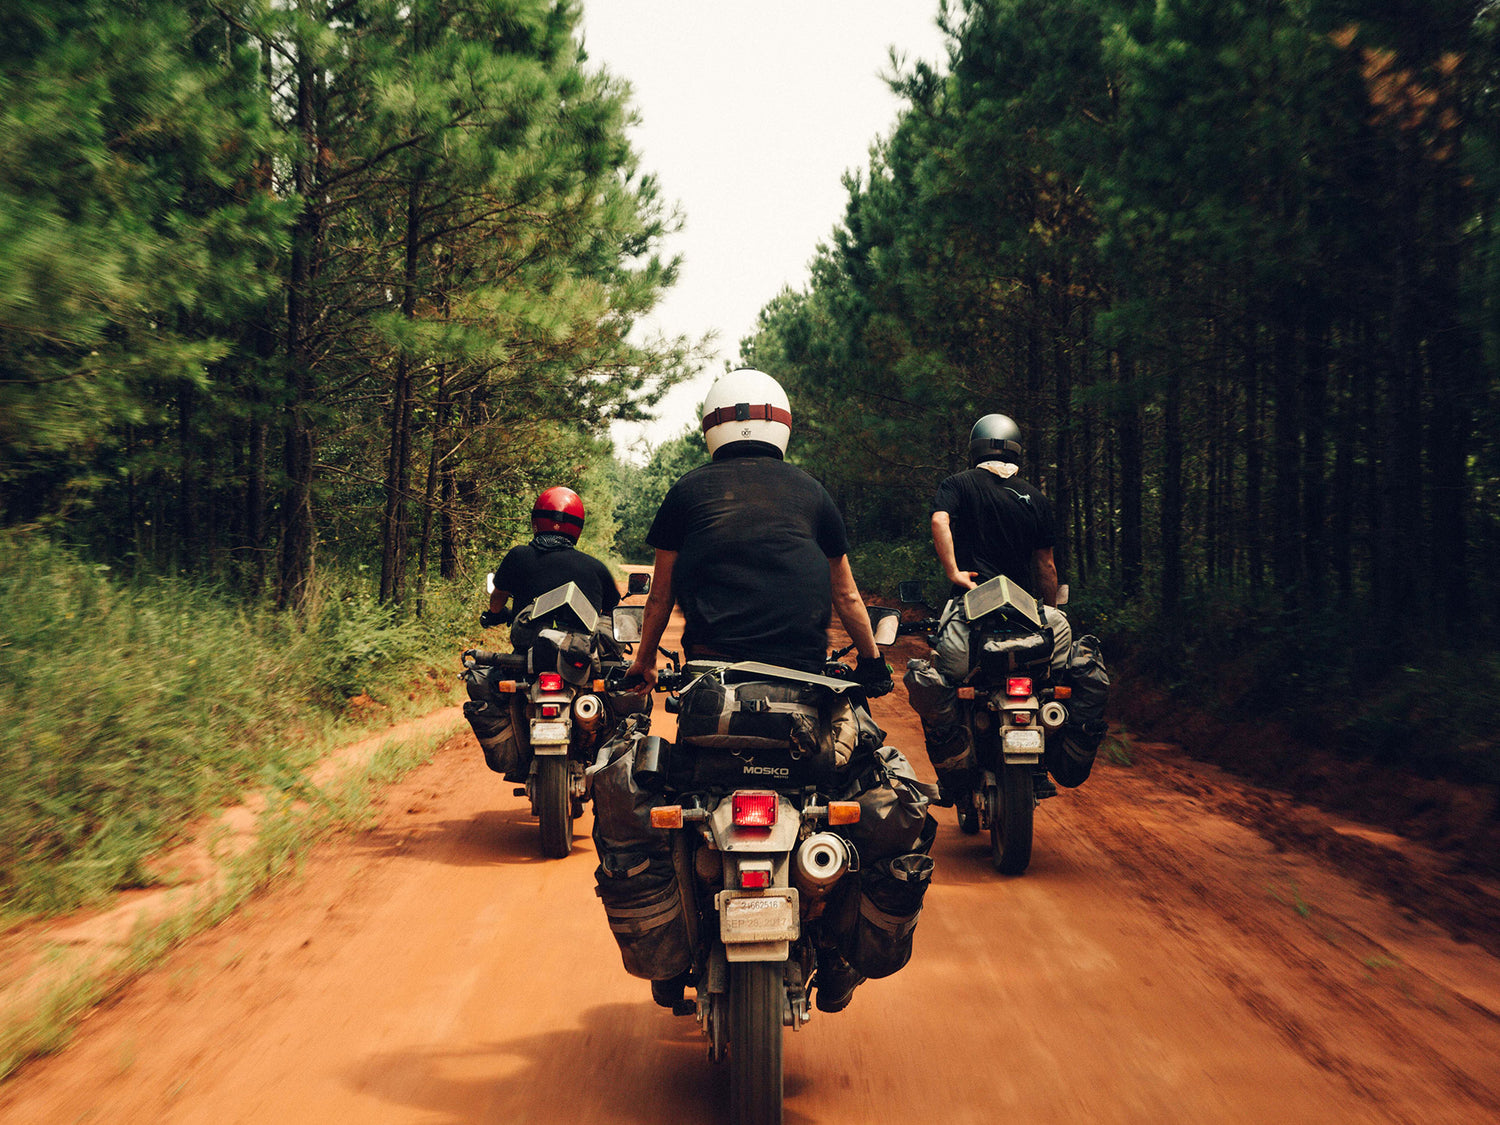 3 people on motorcycles